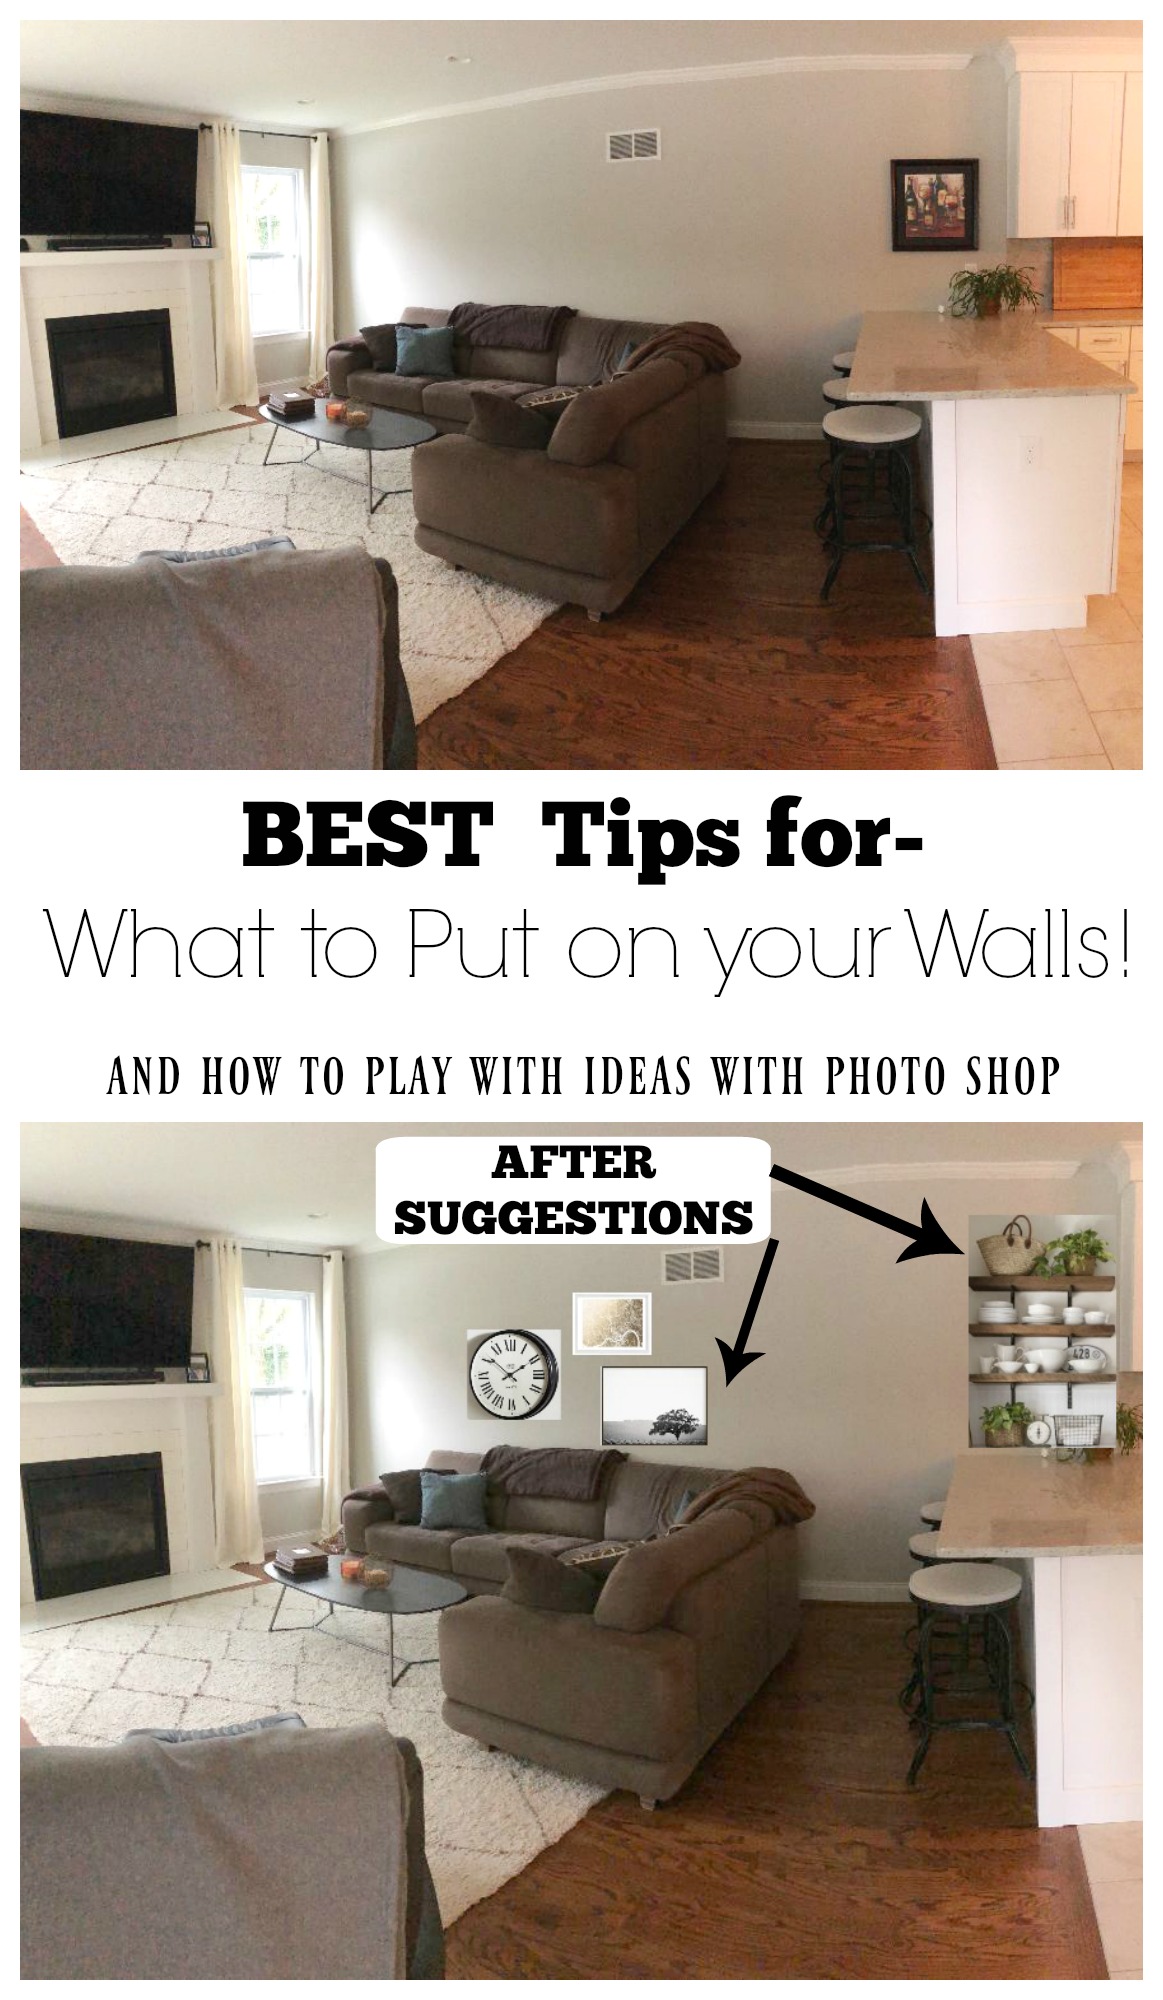 Best Tips for Selecting Artwork for Walls